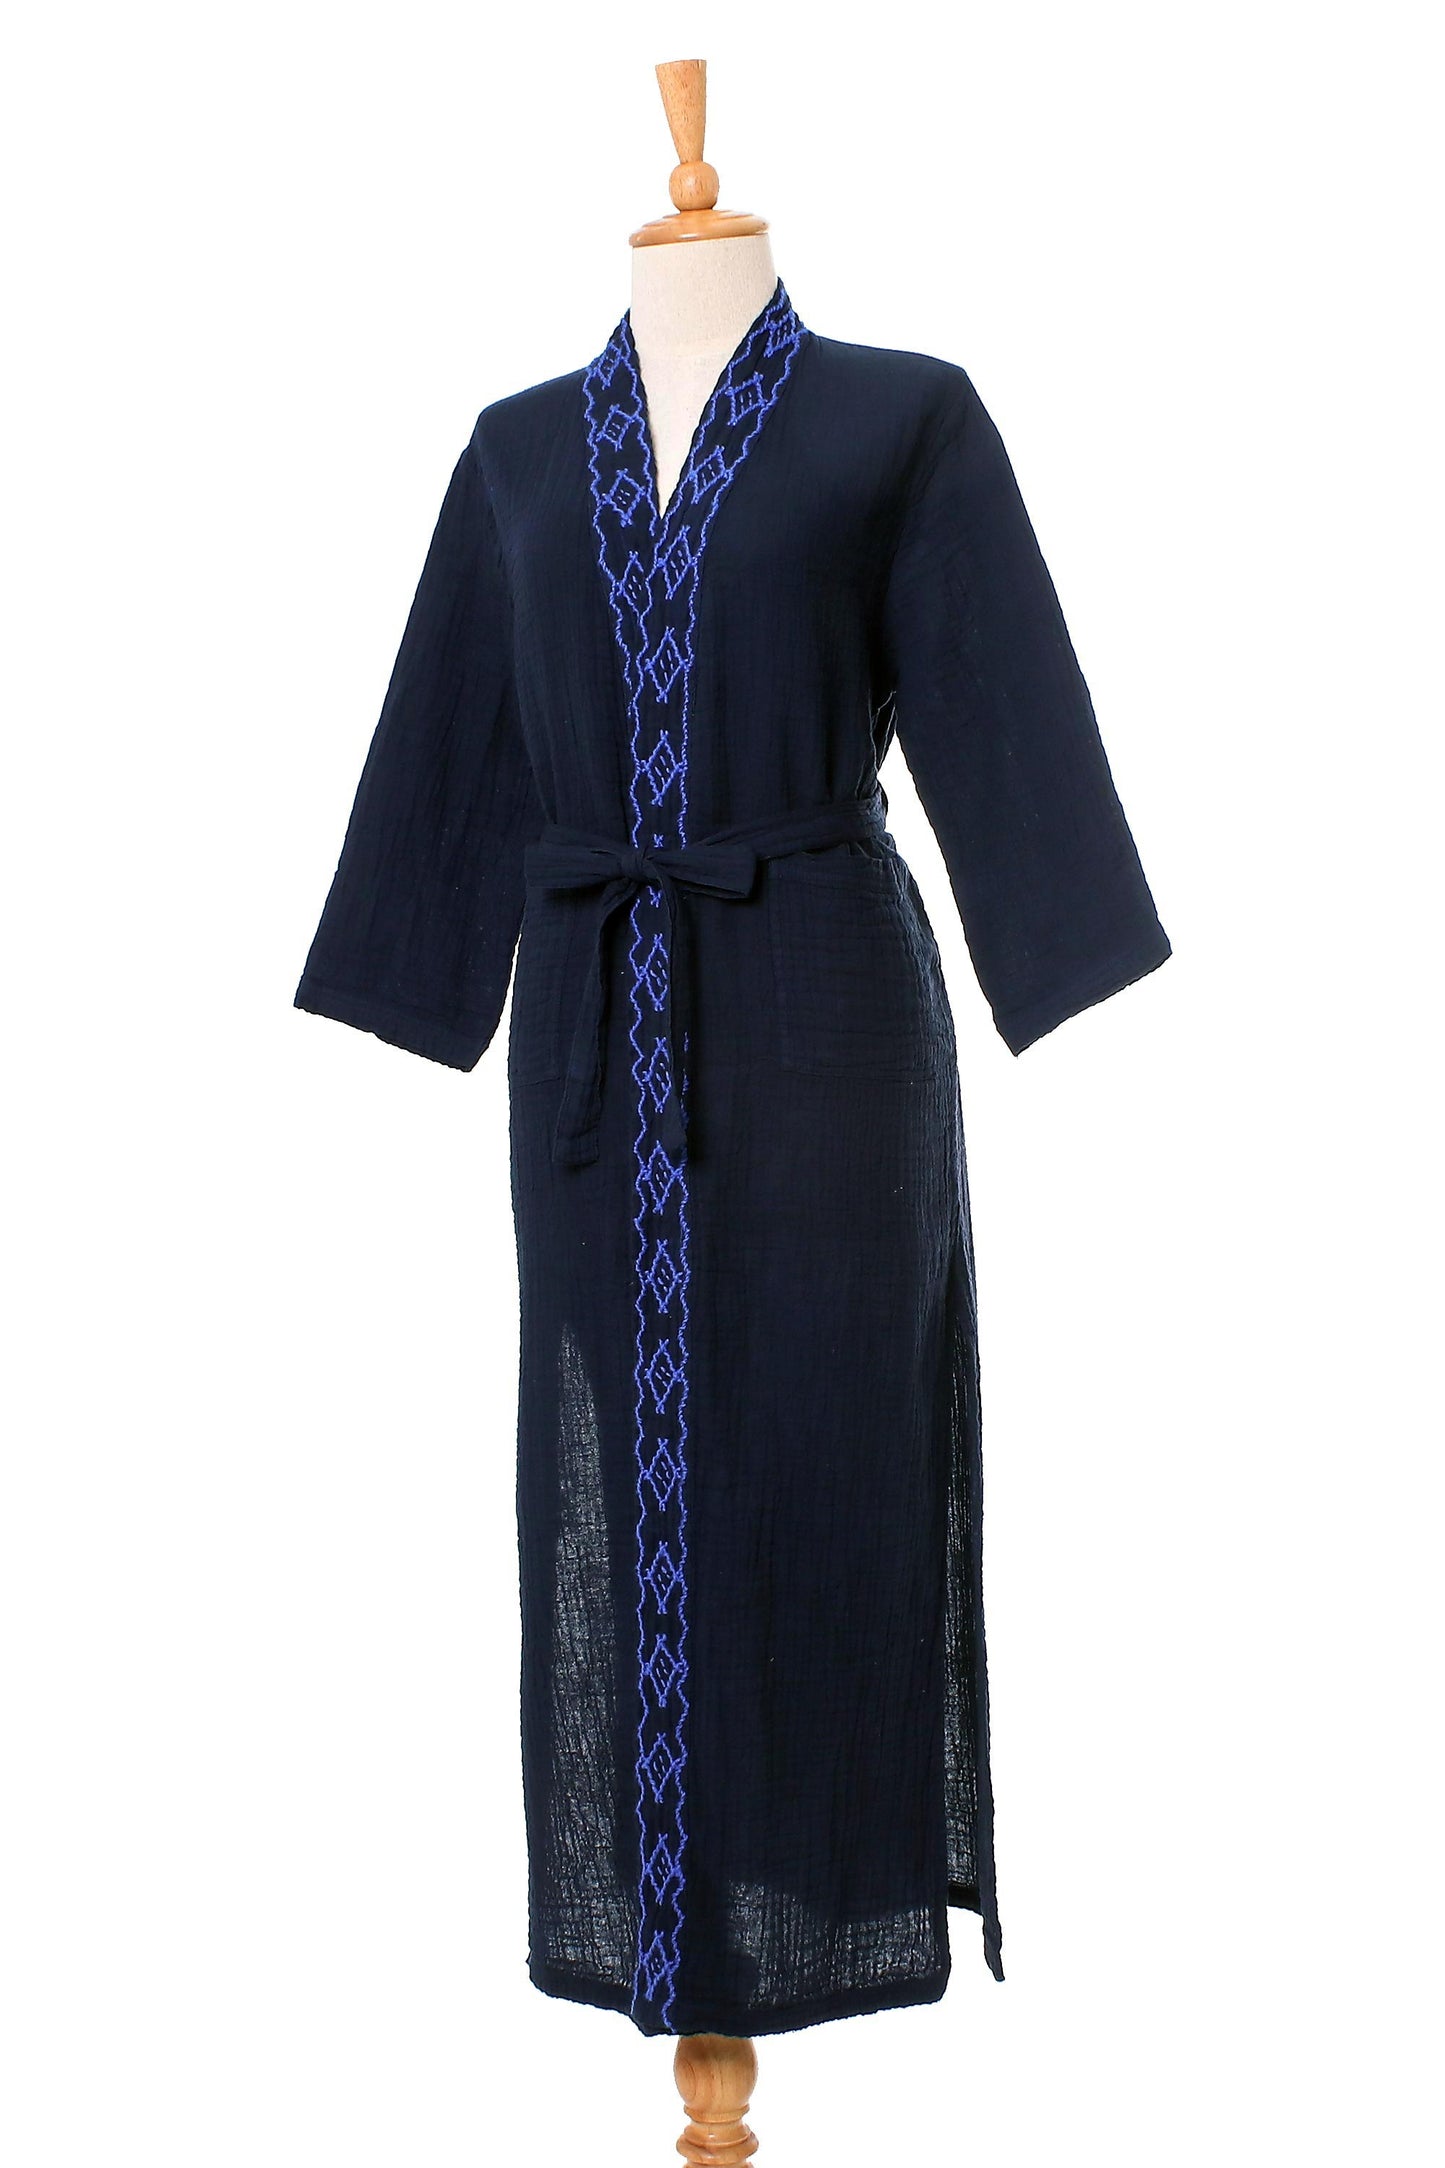 Midnight Relaxation Diamond Embroidered Cotton Robe in Midnight from Thailand